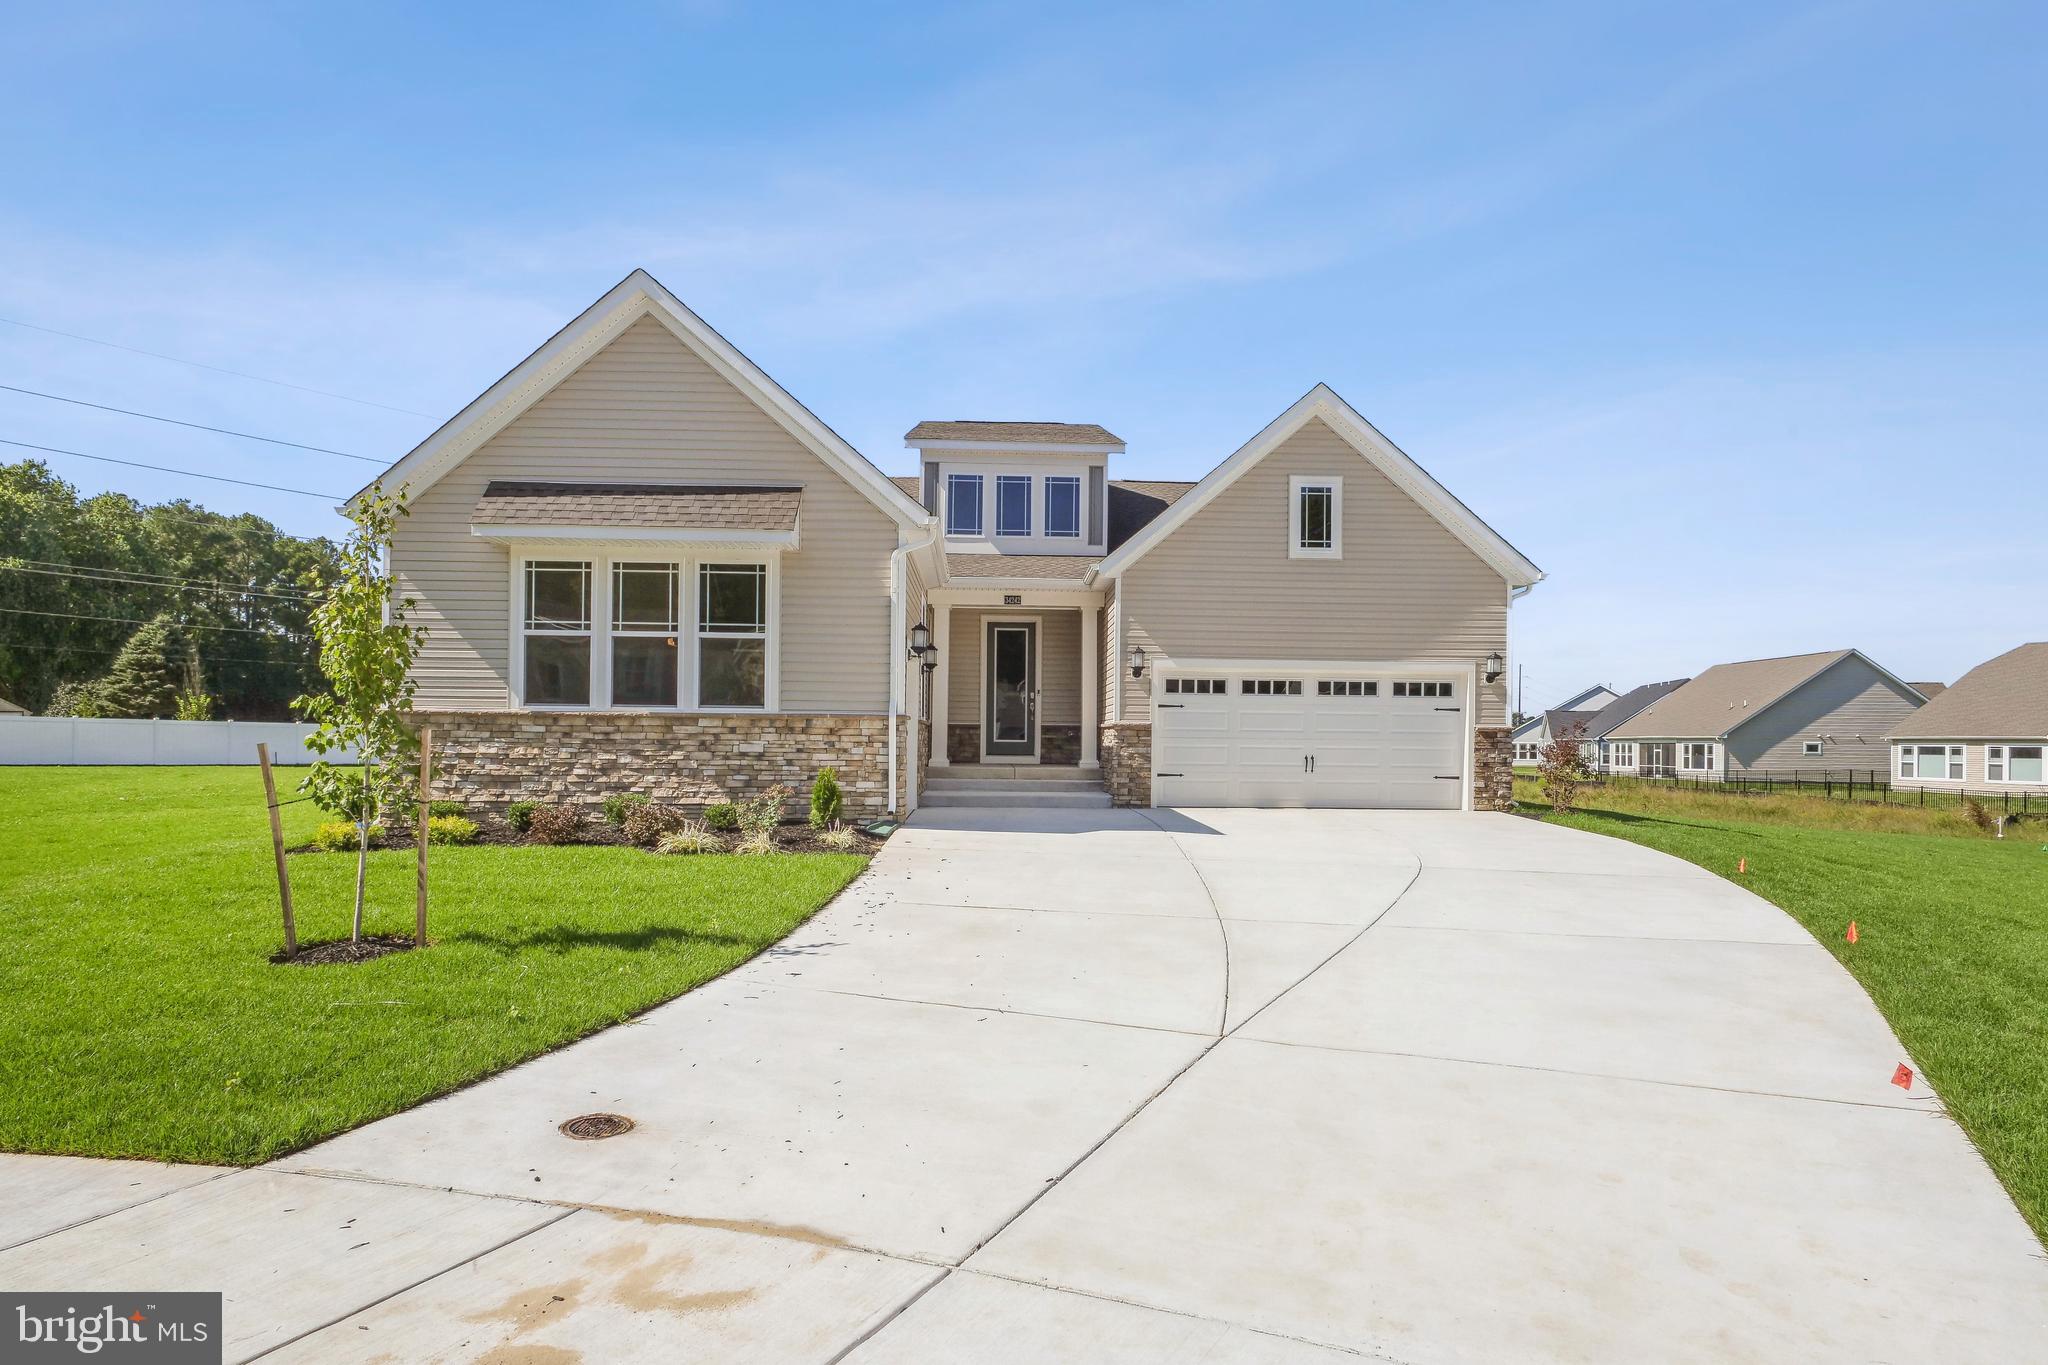 Welcome to Kindleton! Ready for quick delivery. This new home features a split three-car garage and 